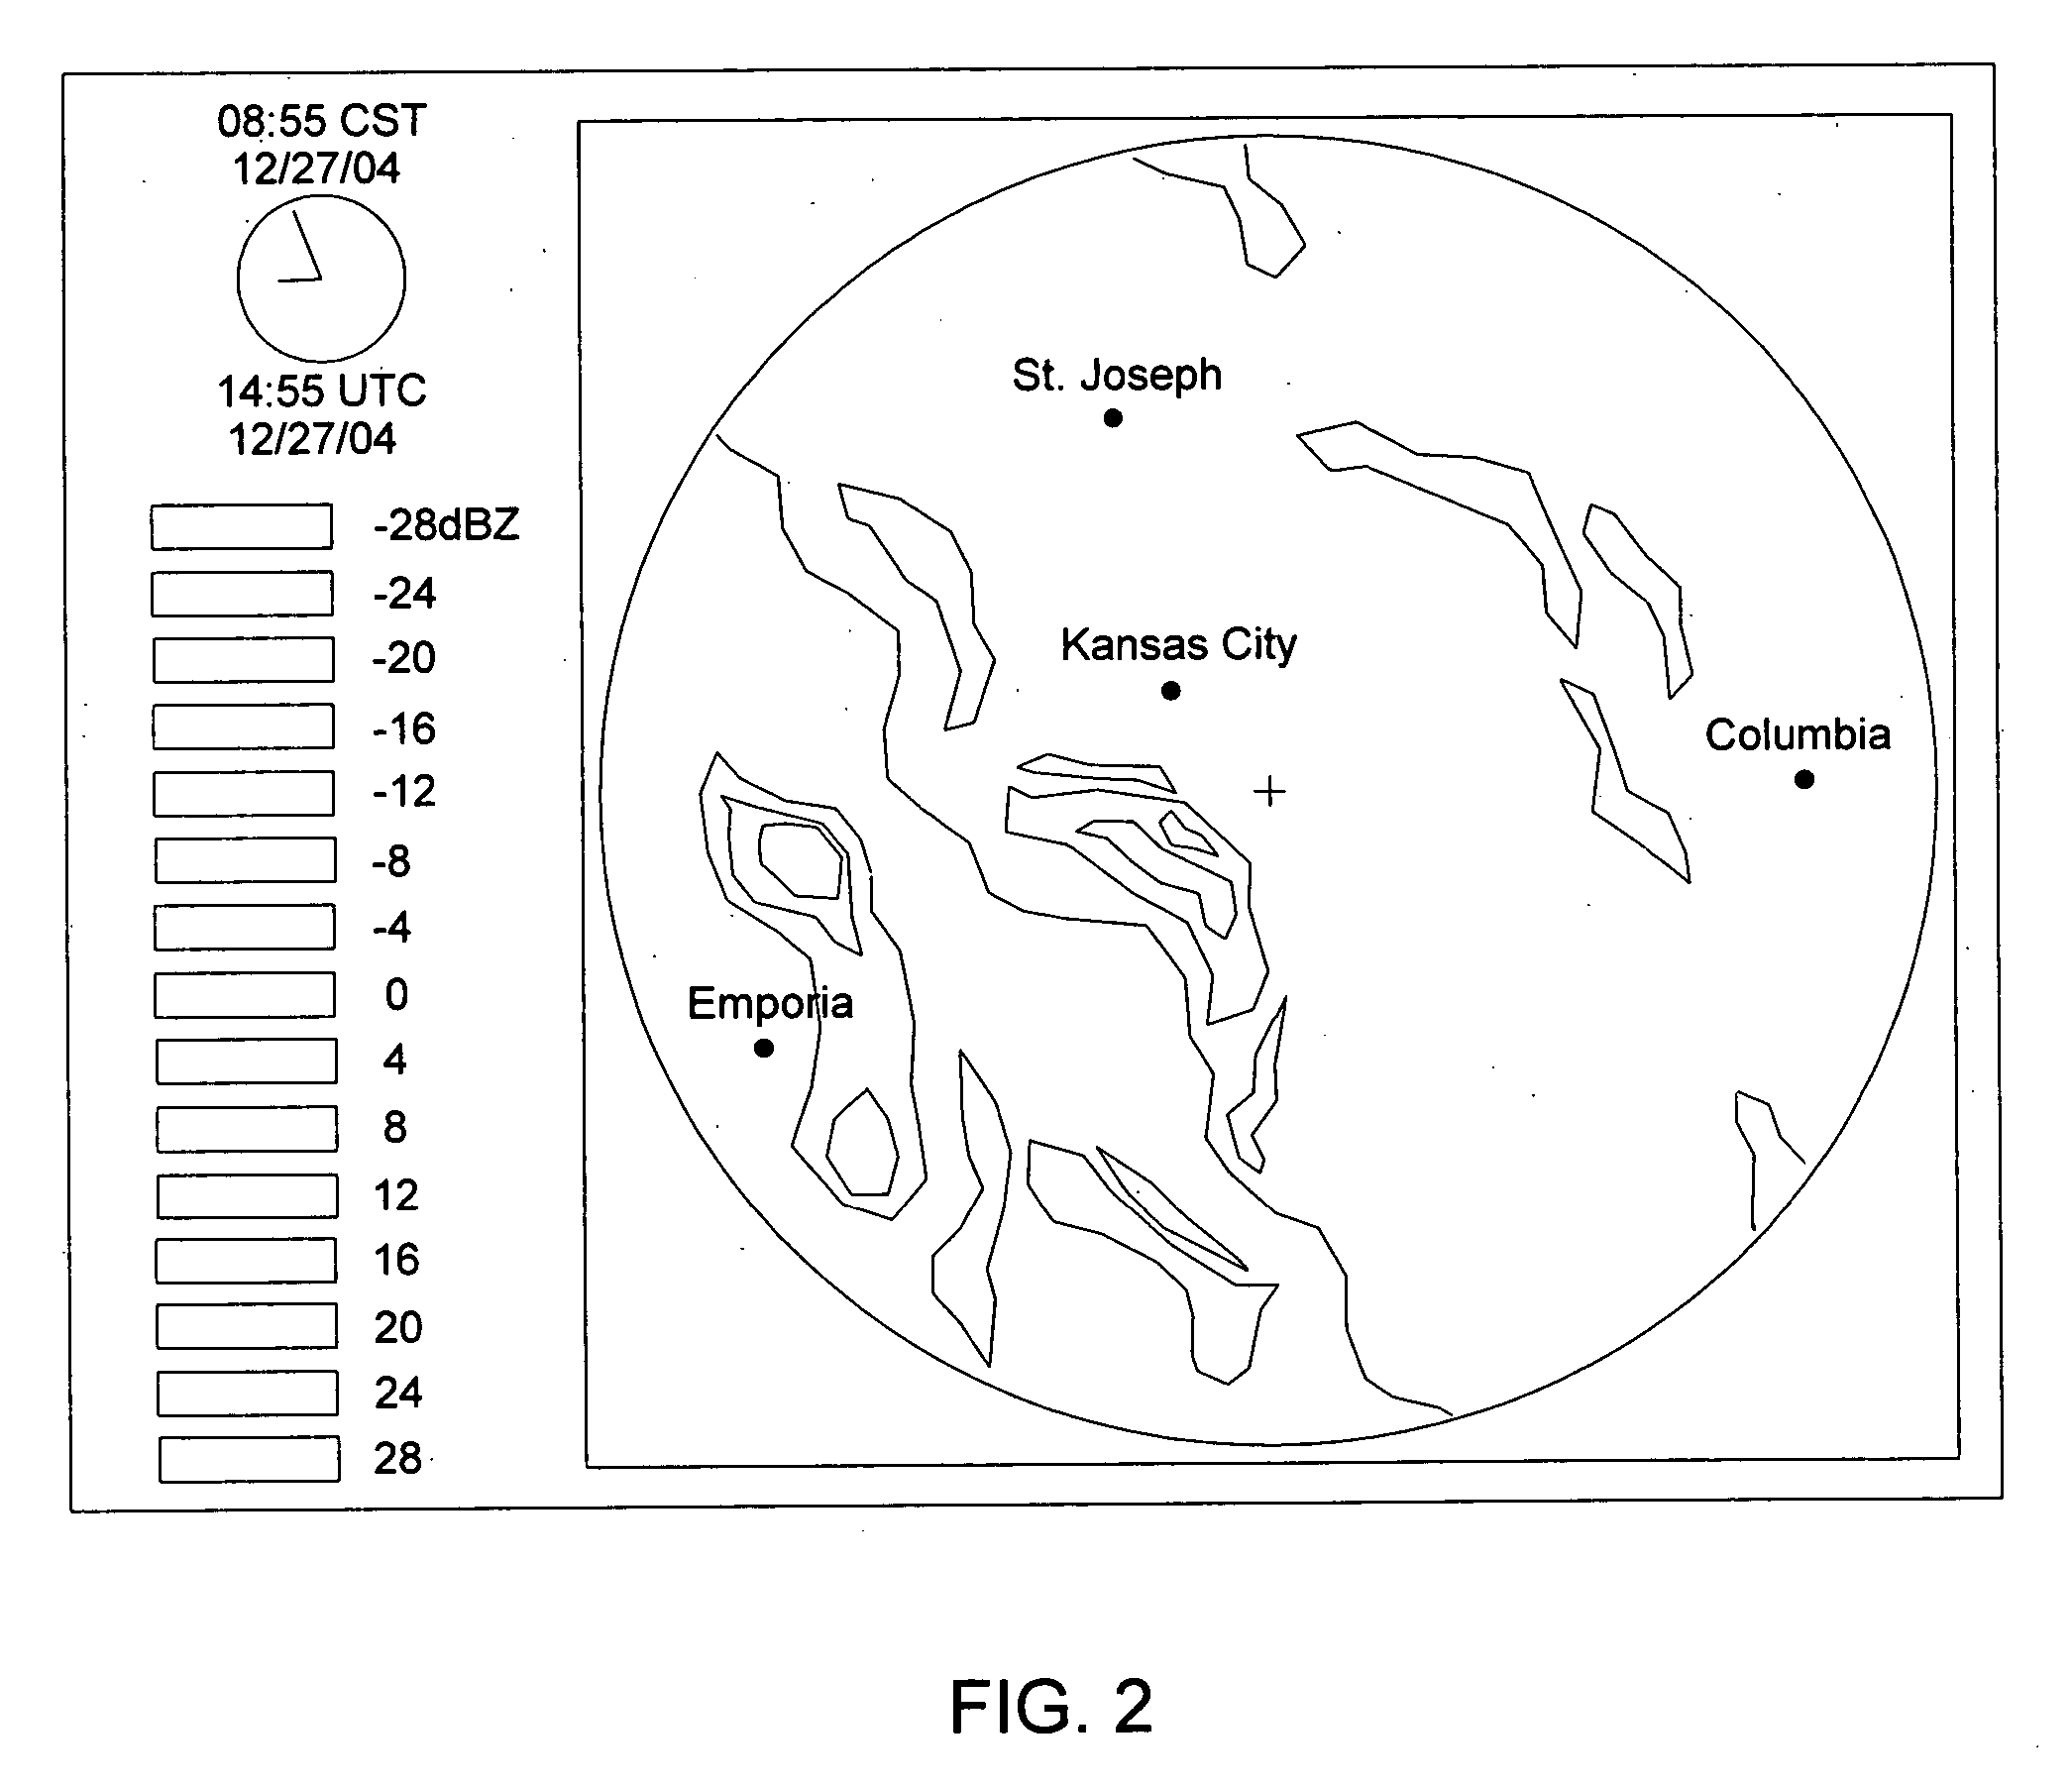 GPS device and method for displaying weather data